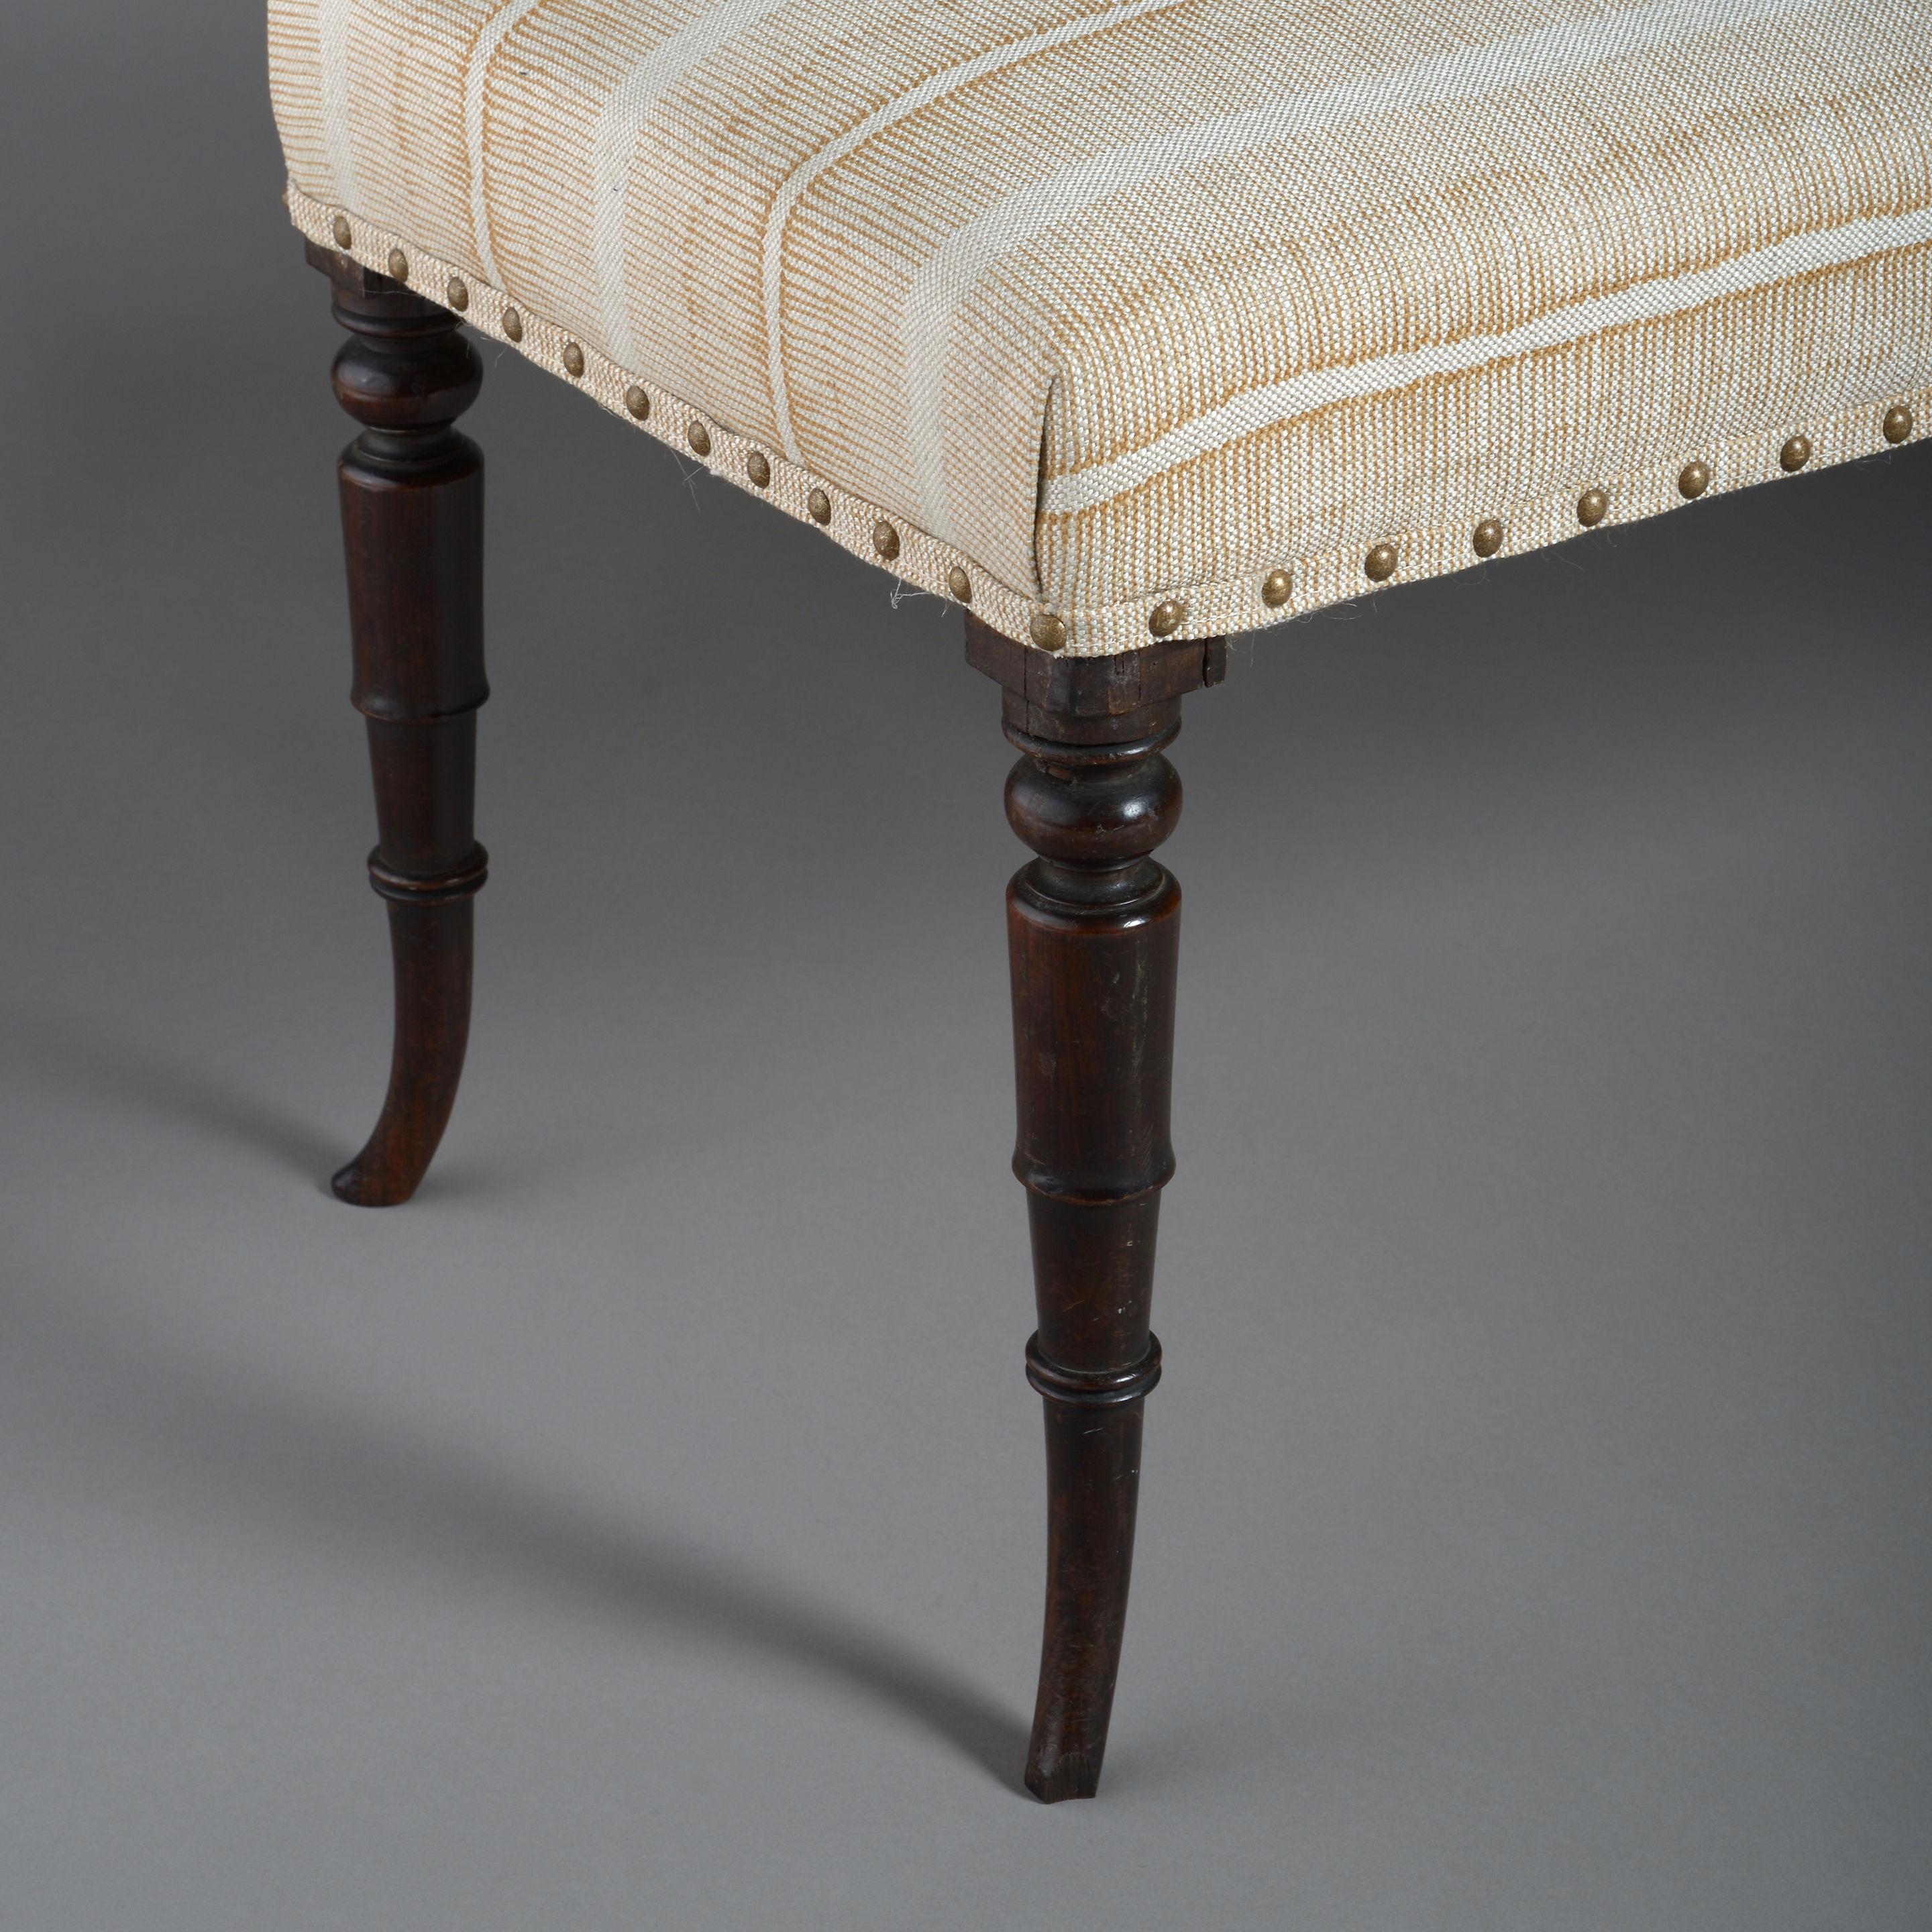 An early 19th century Regency Period upholstered long stool, the upholstered seat set upon four turned mahogany sabre legs.